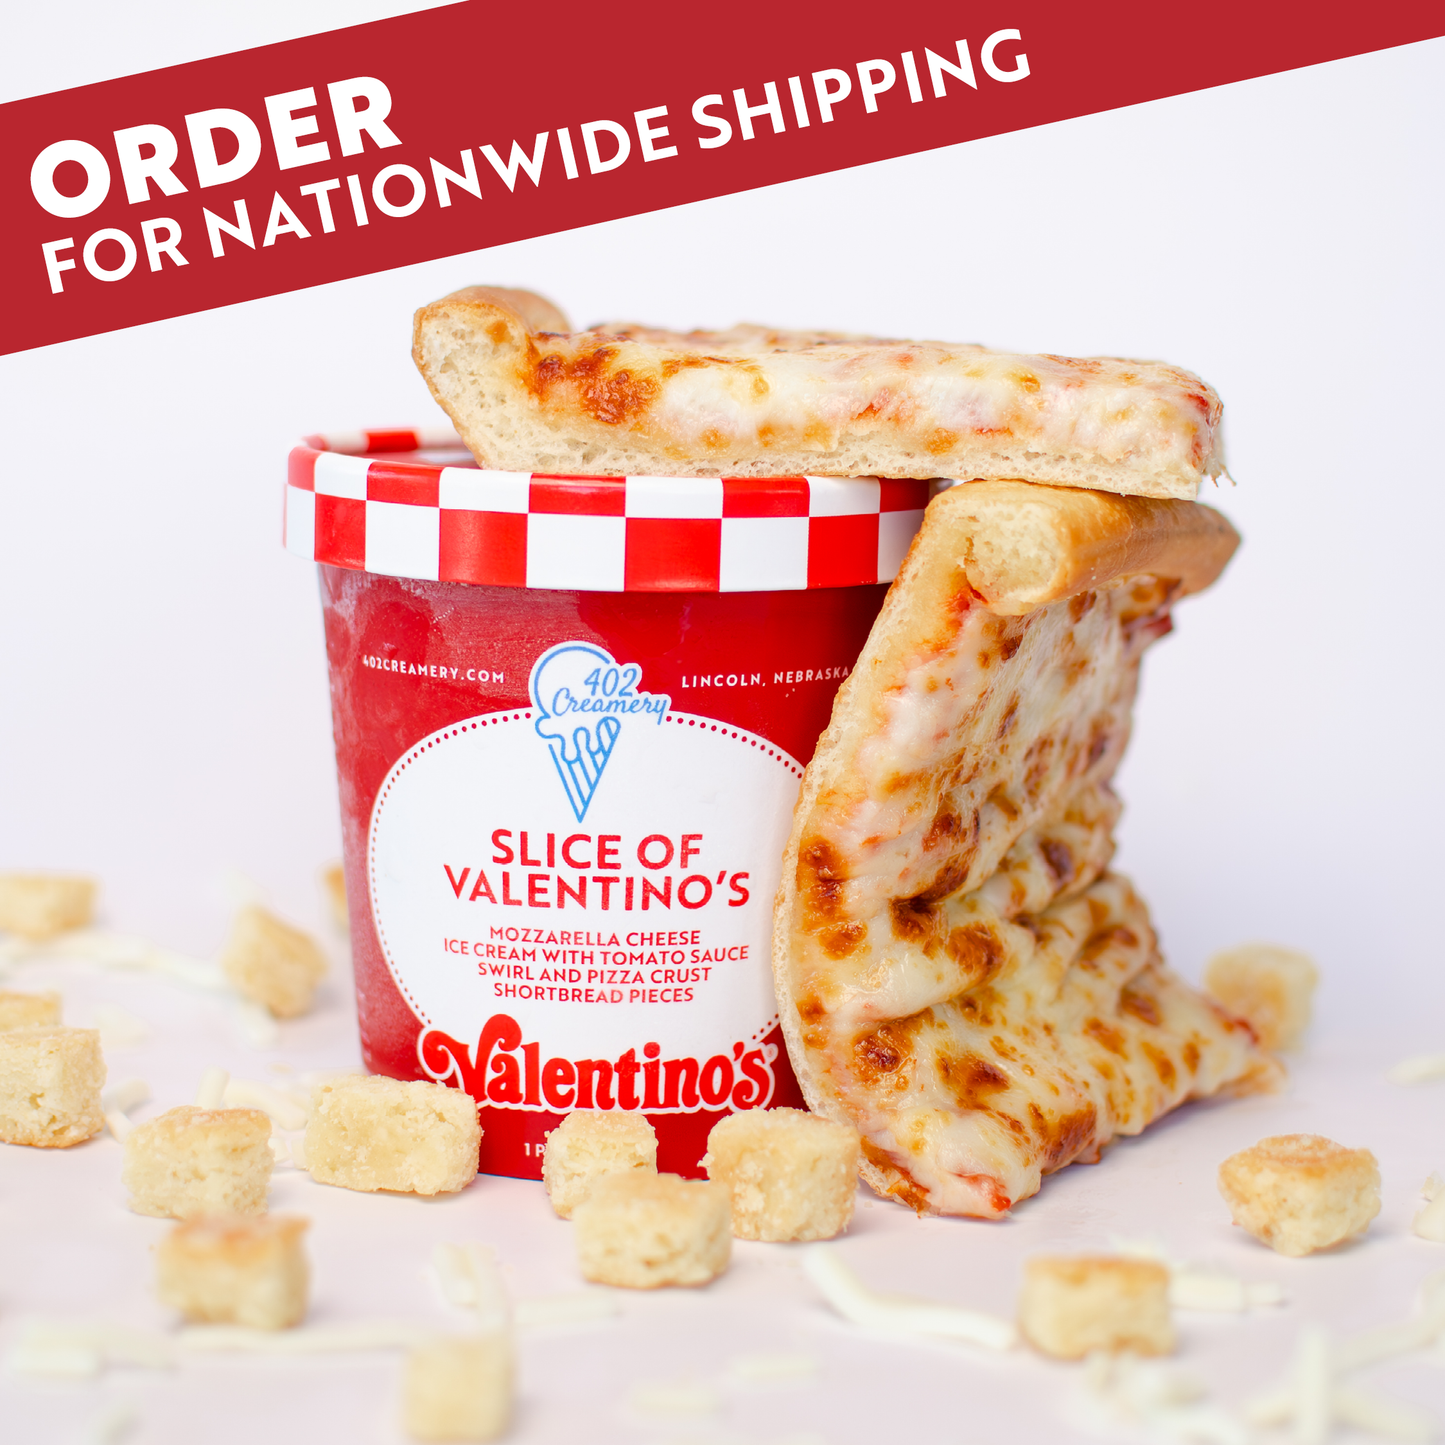 NATIONWIDE SHIPPING | "Slice of Valentino's"